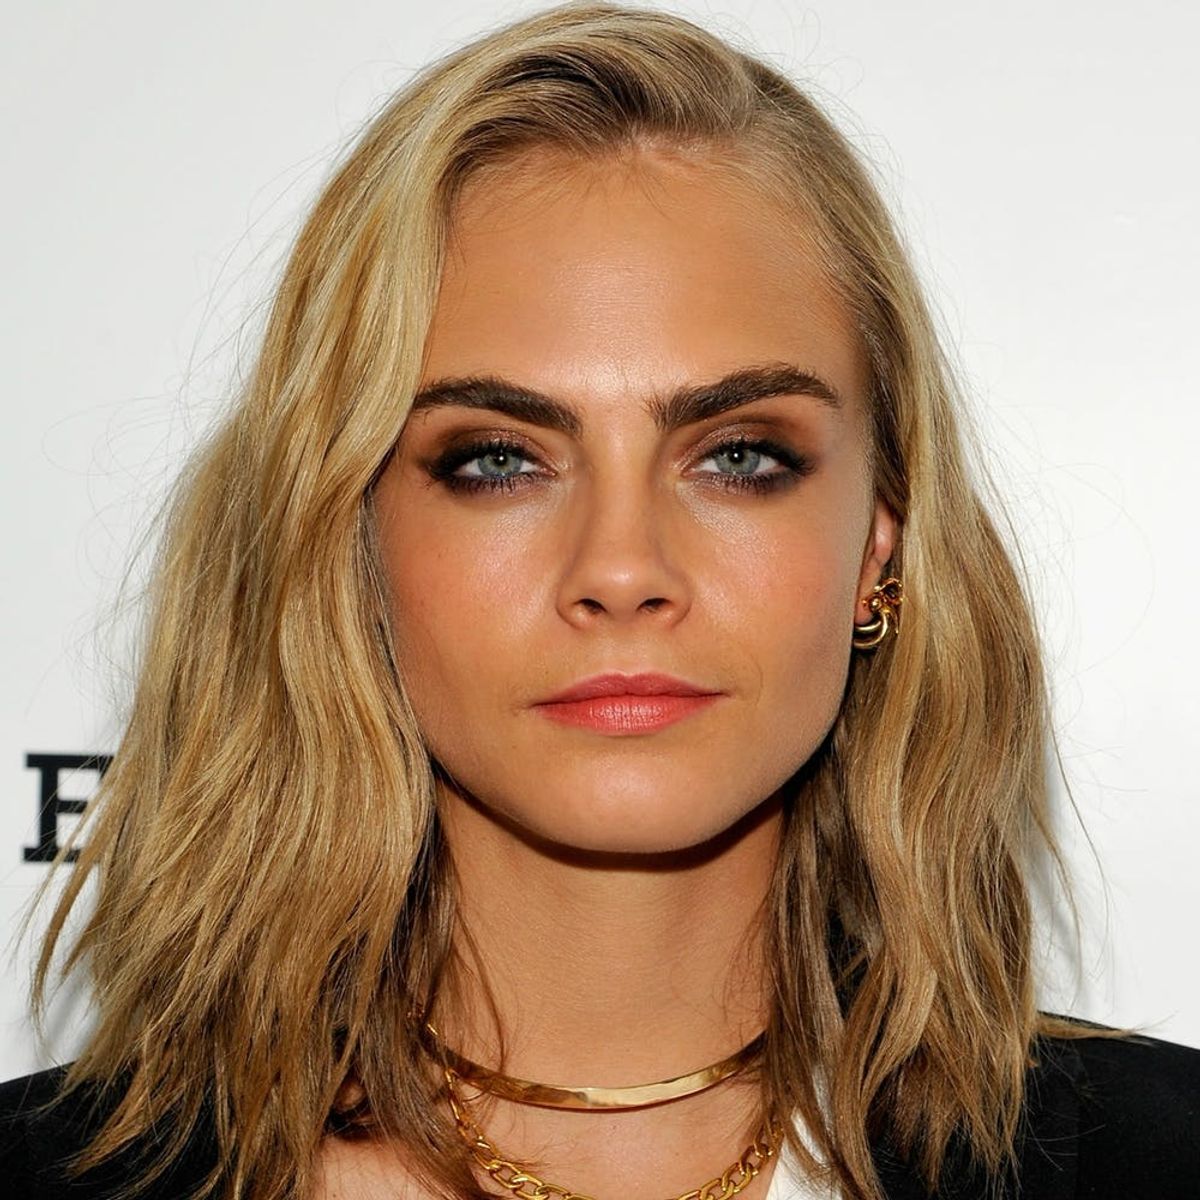 Check Out Cara Delevingne’s Latest Animal-Themed Ink